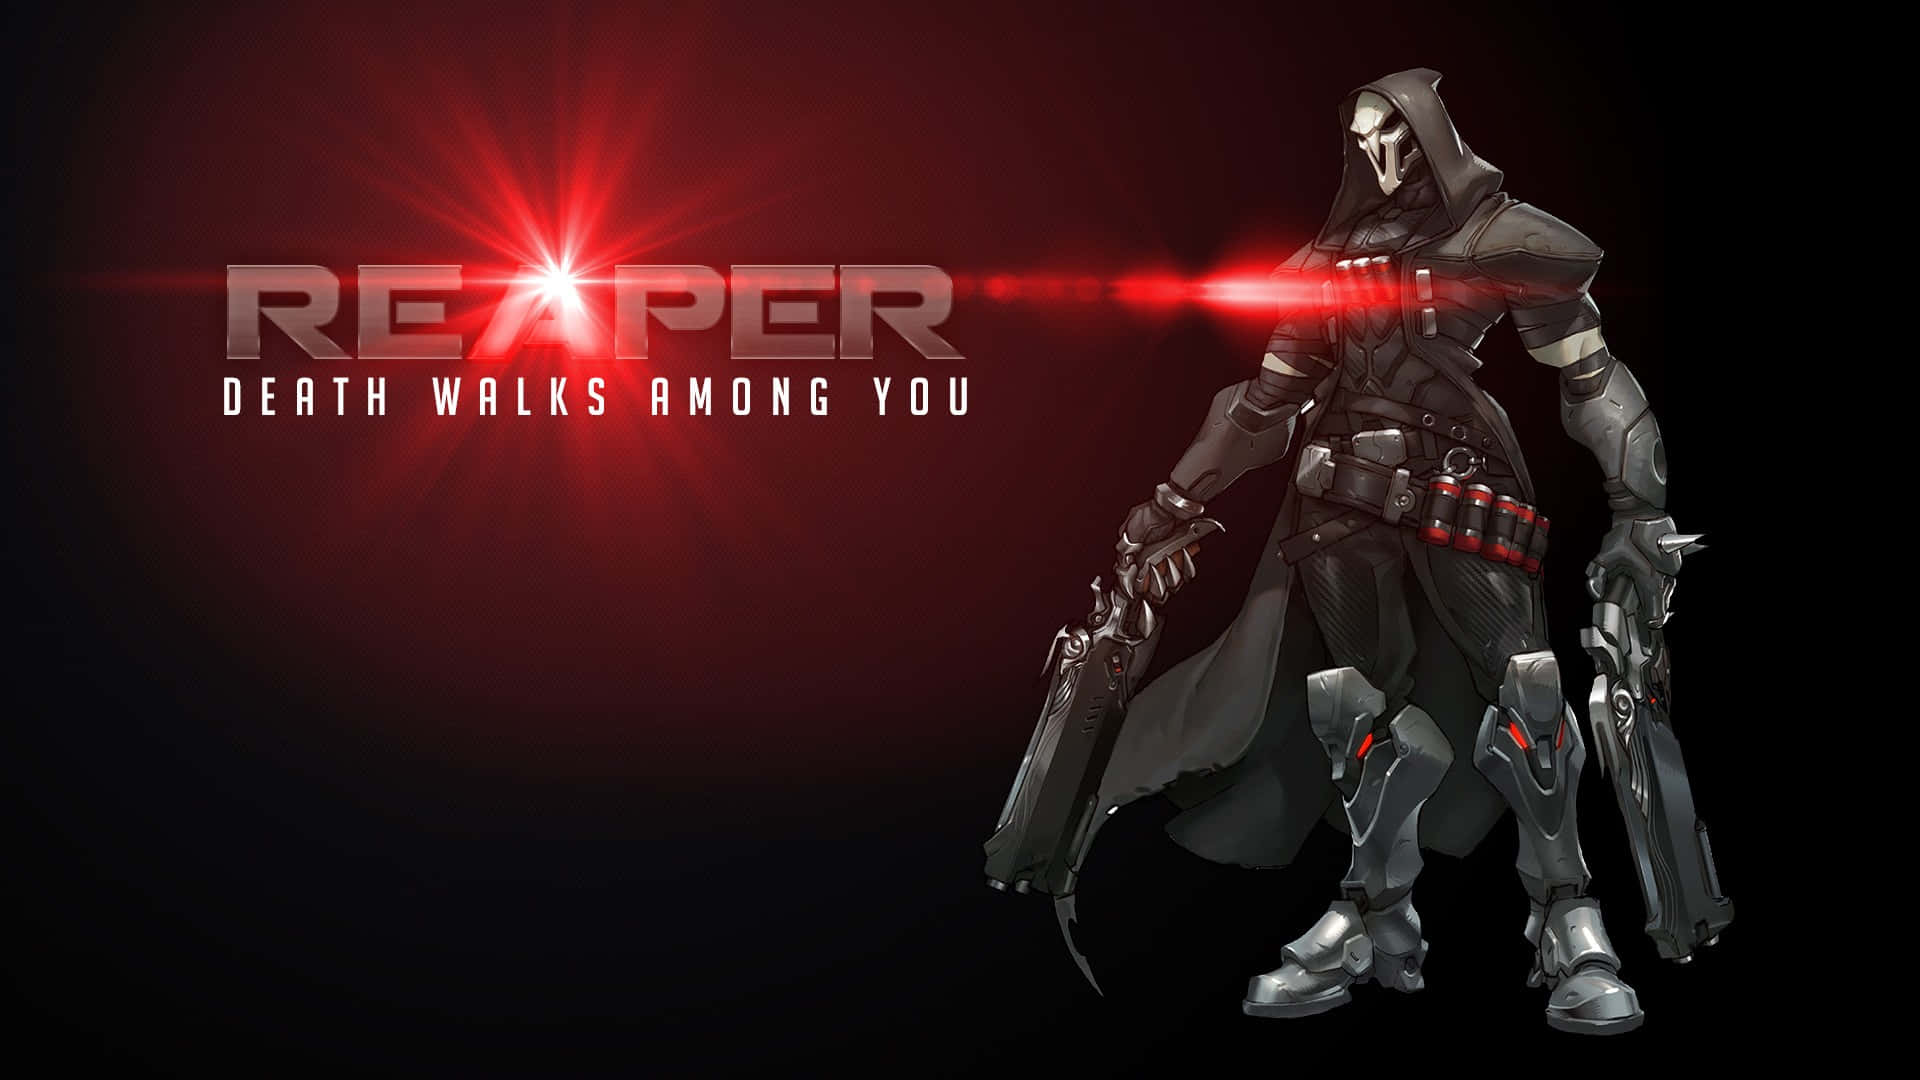 "Unleash your power with Reaper – the protagonist of Overwatch!" Wallpaper